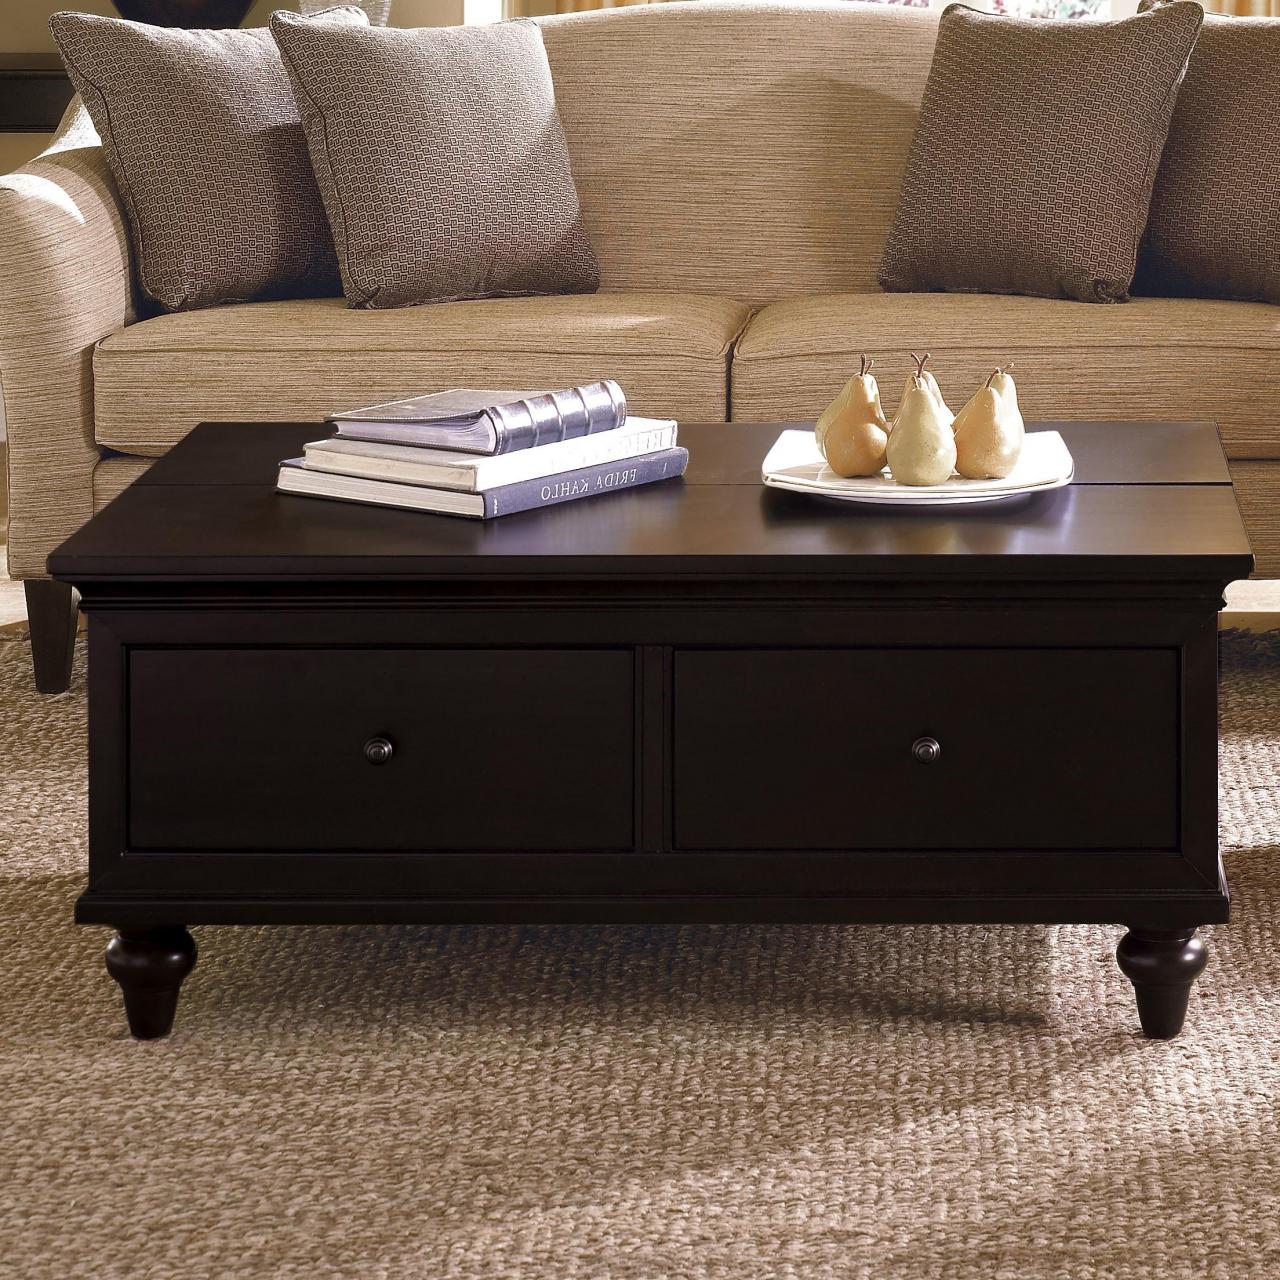 Narrow Coffee Table With Storage For Small Spaces